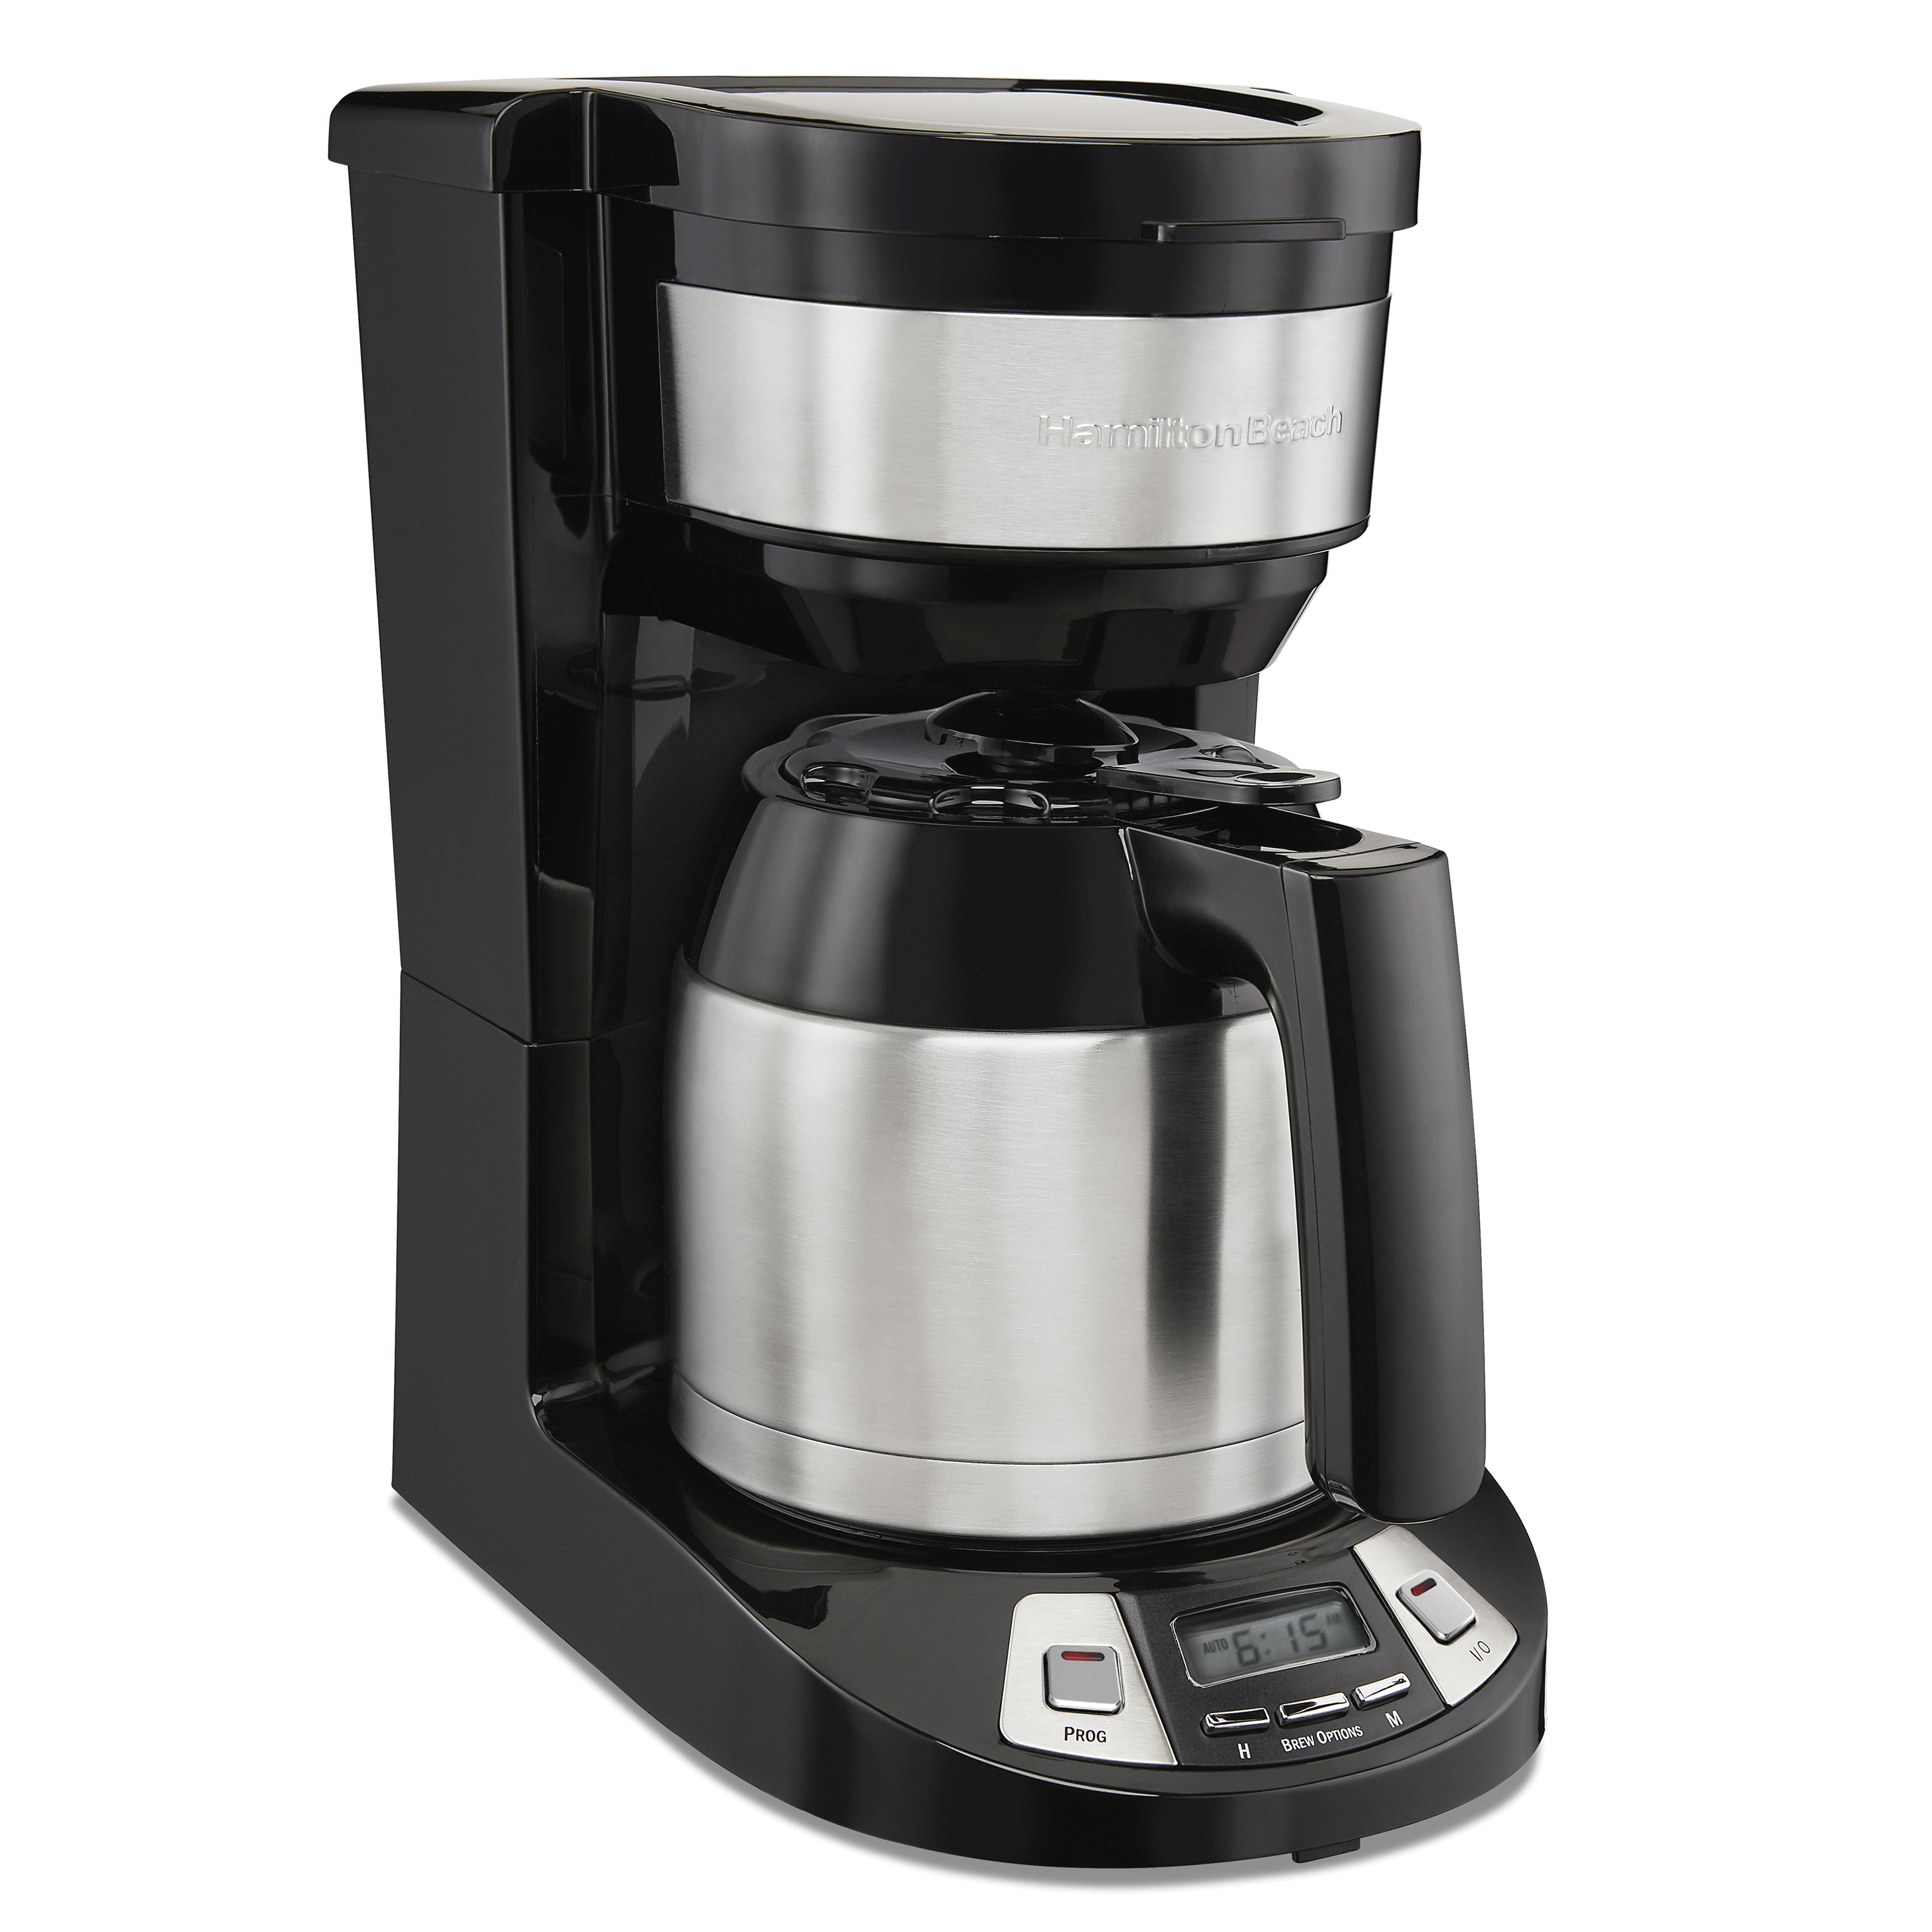 8 Cup Programmable Coffee Maker with Thermal Carafe (46240)